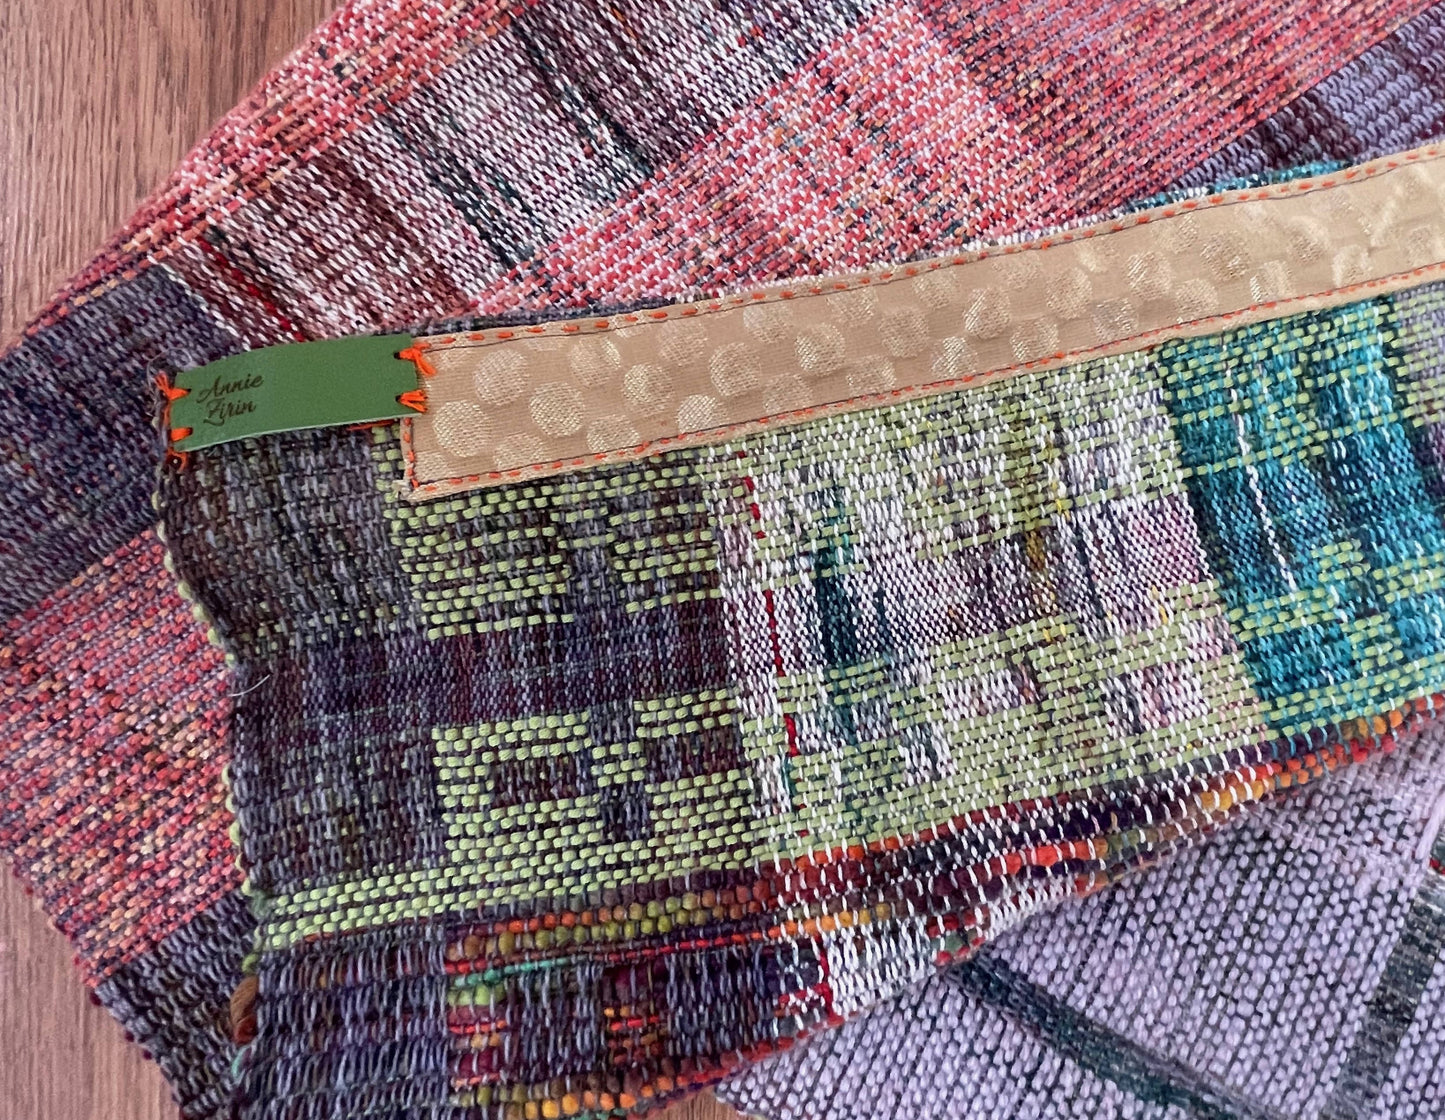 Untitled Handwoven/ Wool (1)